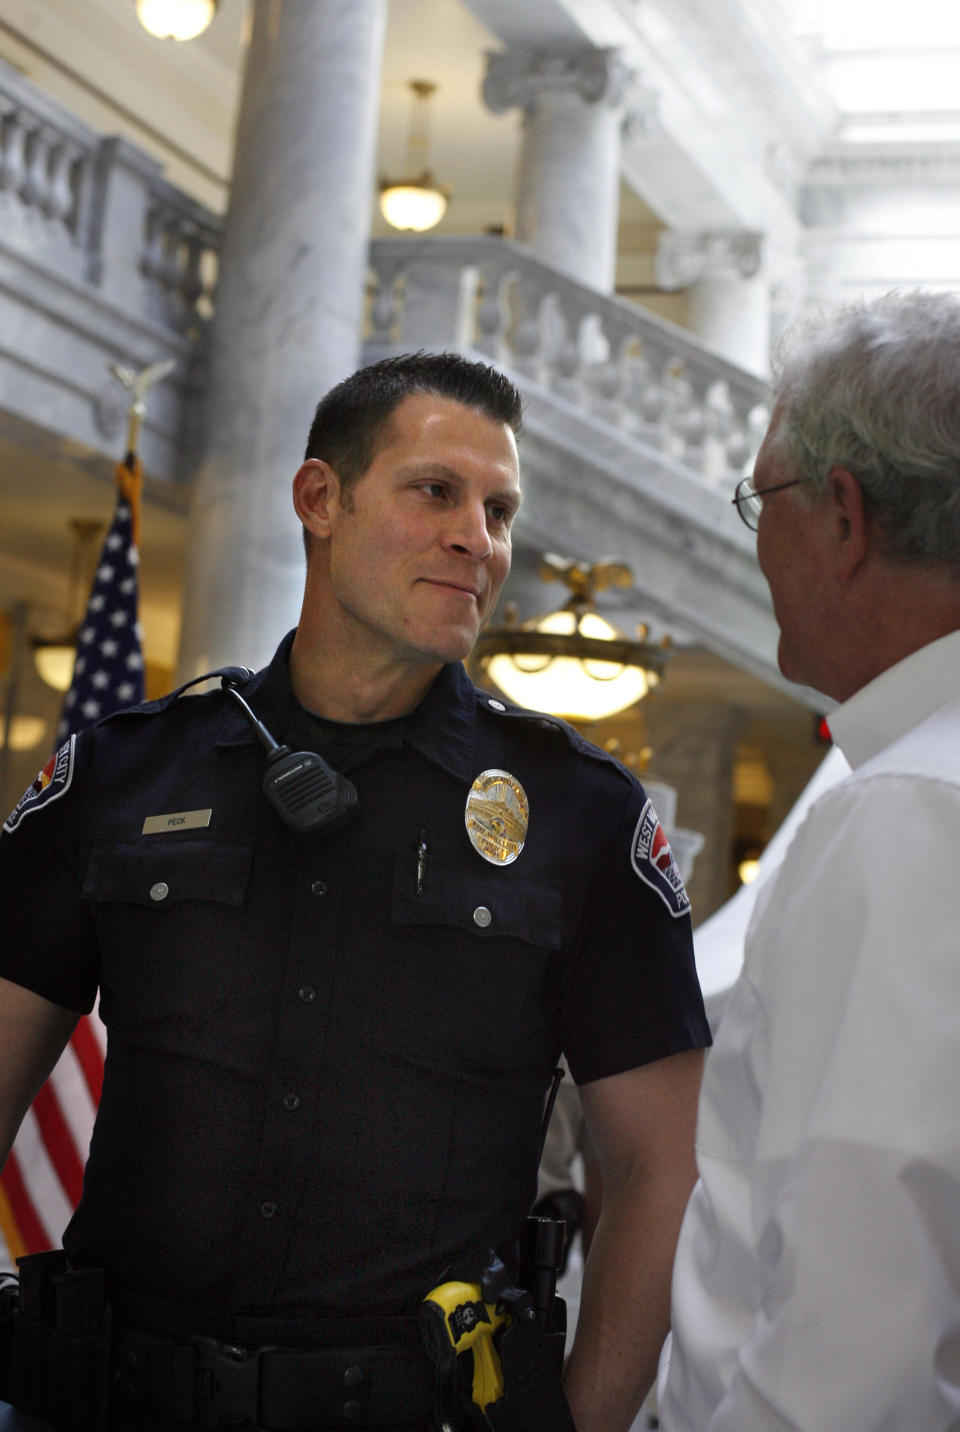 In this May 30, 2012, photo, Officer Kevin Peck of the West Valley Police Department, is congratulated after receiving the Law Enforcement Humanitarian Award at an awards ceremony honoring Utah's emergency responders at the Utah state Capitol, Salt Lake City. Peck was honored for calming and holding hands with a woman who was pinned underneath a UTA bus after getting hit while walking in a crosswalk in December 2011. The Deseret News reported that Peck helped save another crash victim while he was in Europe in November 2019. (Laura Seitz/The Deseret News via AP)